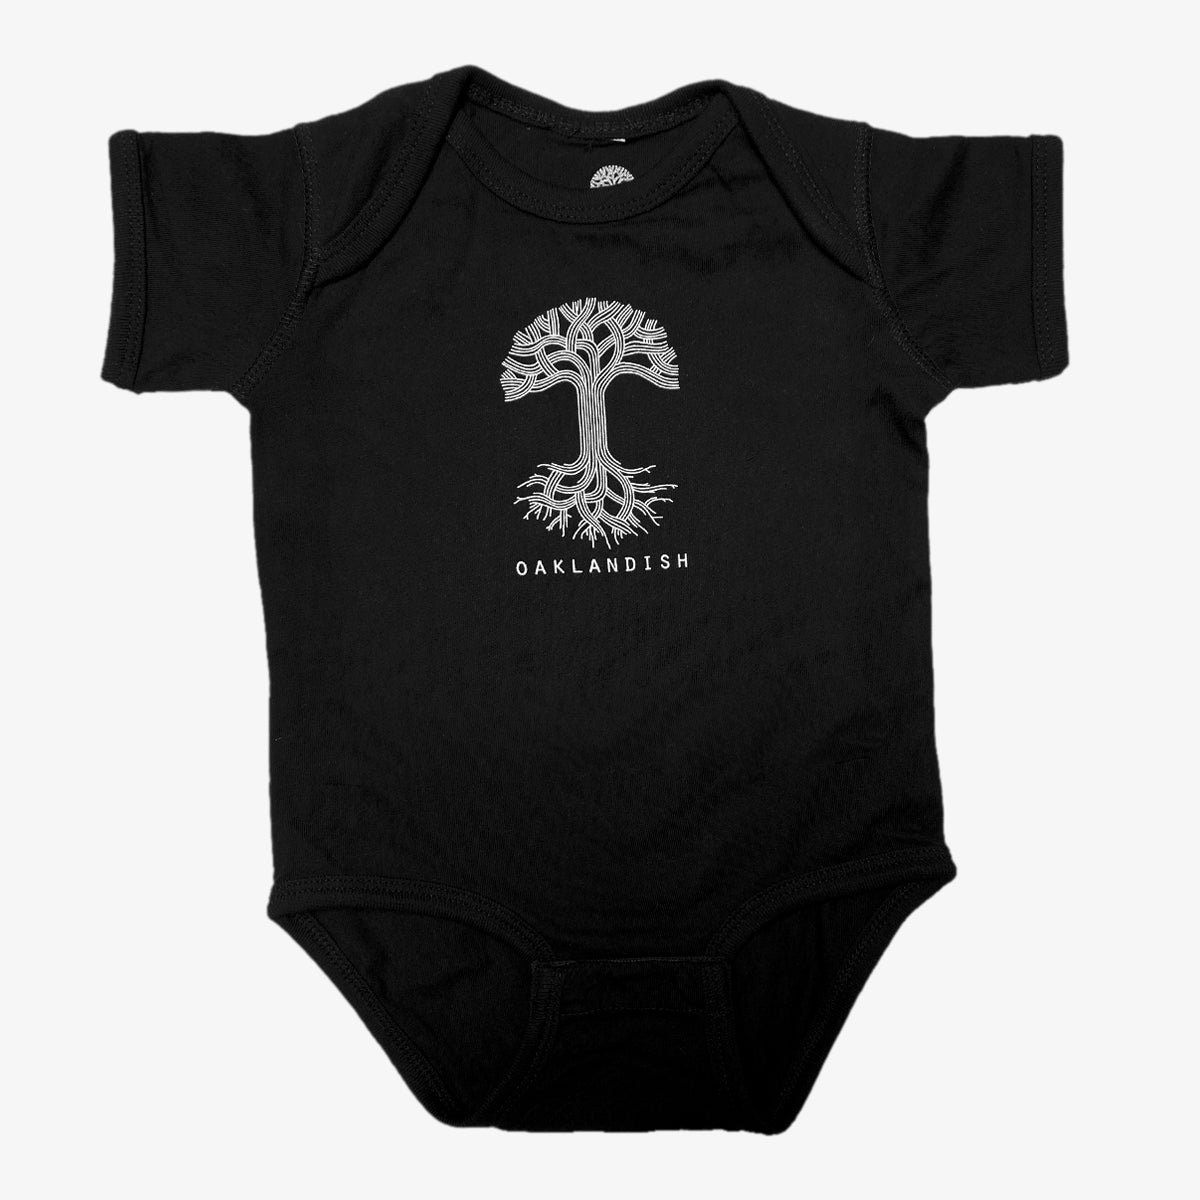 Black infant one-piece with a white Oaklandish tree logo and wordmark on the chest.